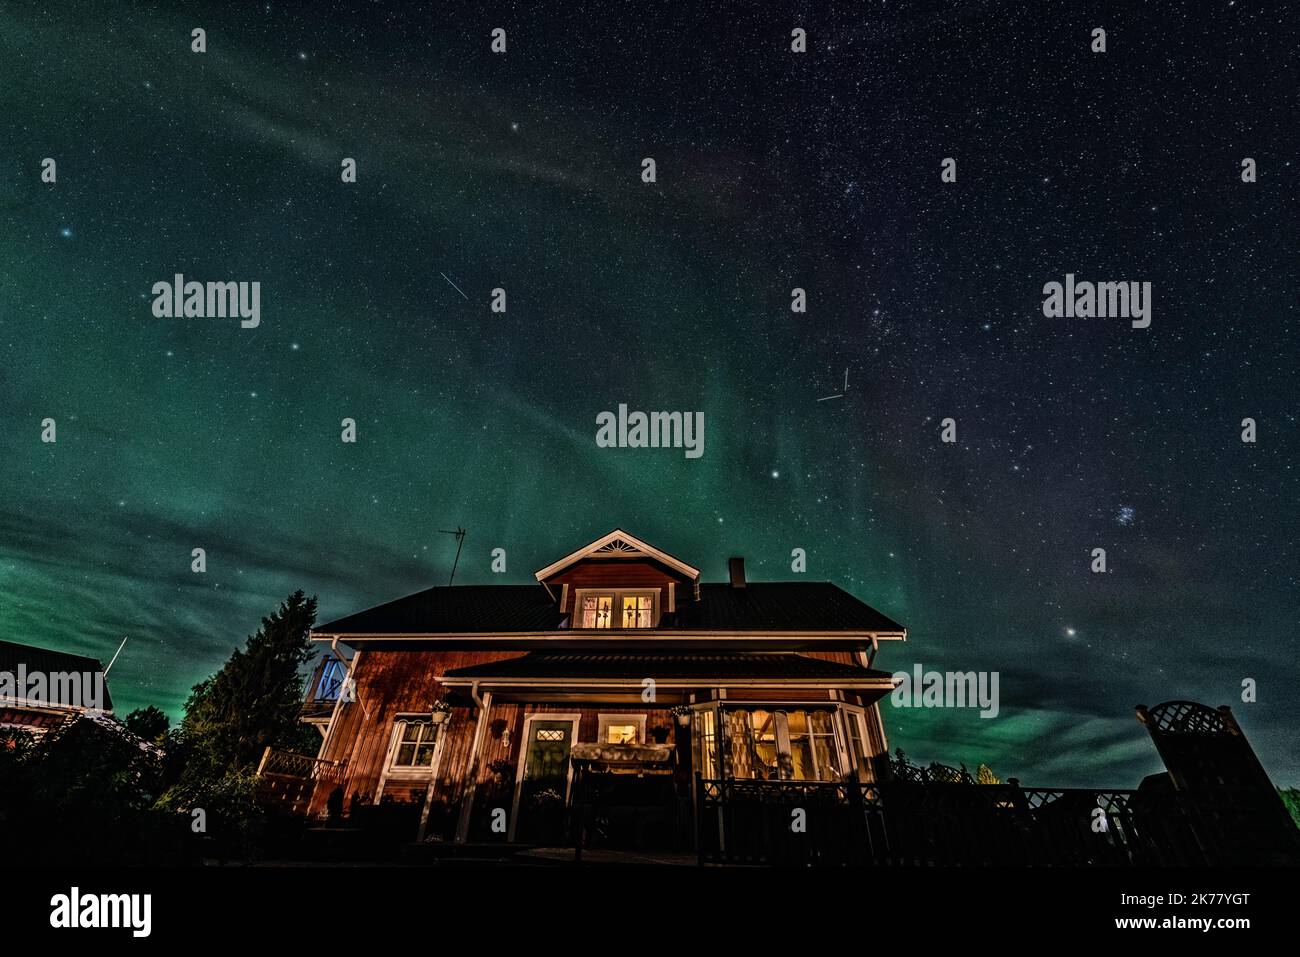 Star Trails and Aurora - Long exposure to capture star trails and light aurora borealis over Swedish countryside house, night scenery Stock Photo